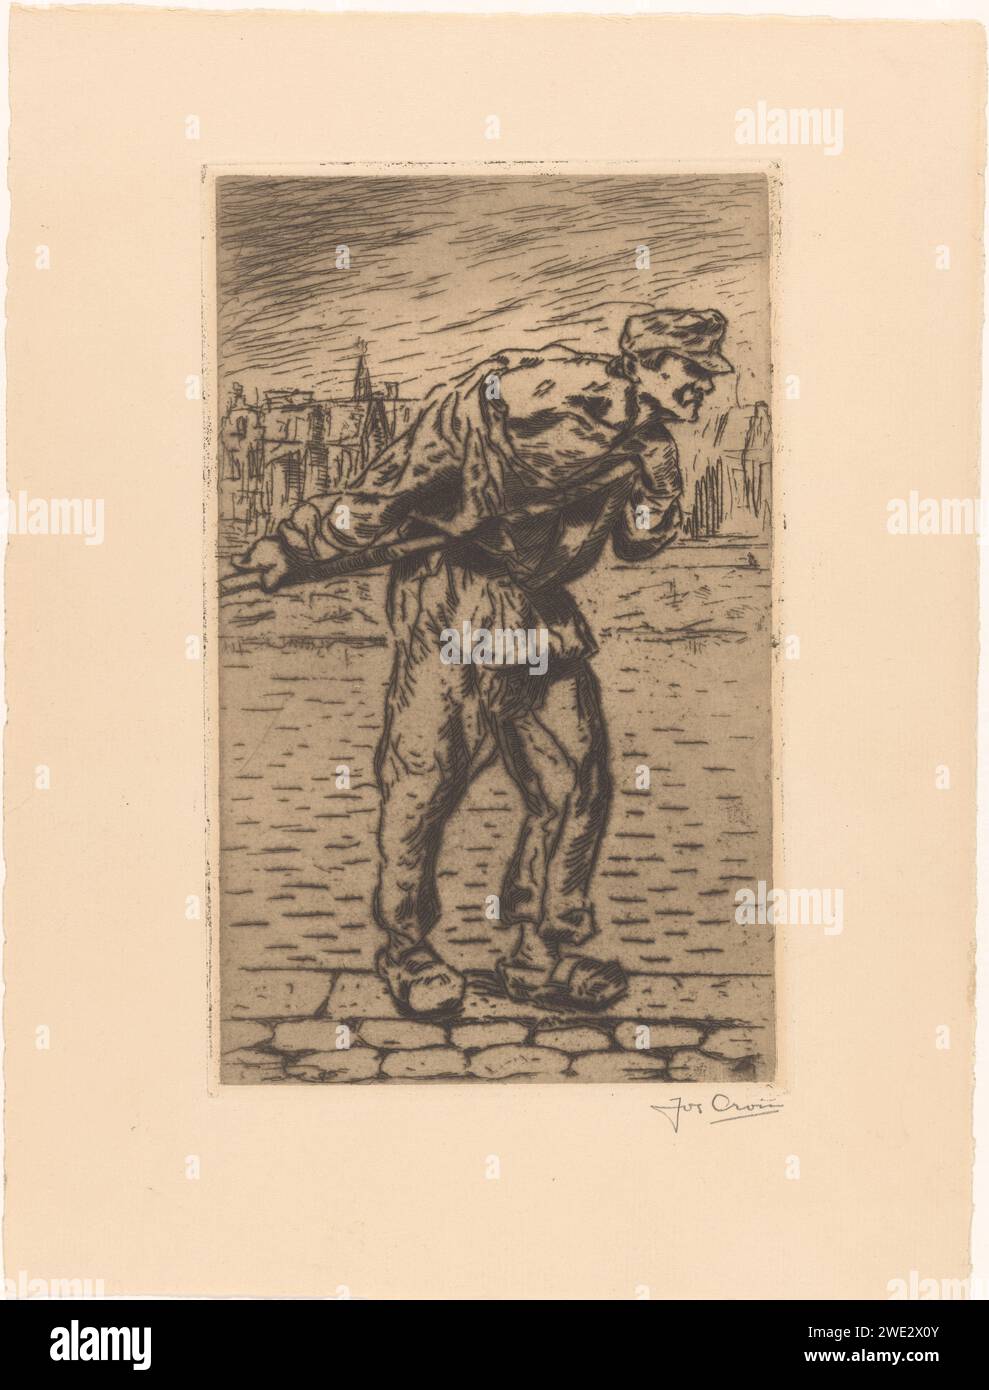 Dragging Man, Jos Croïn, 1904 - 1936 print A man on clogs pulls a little behind him on the street with a rope.  paper etching drawing, pulling something. wooden shoes, clogs Stock Photo